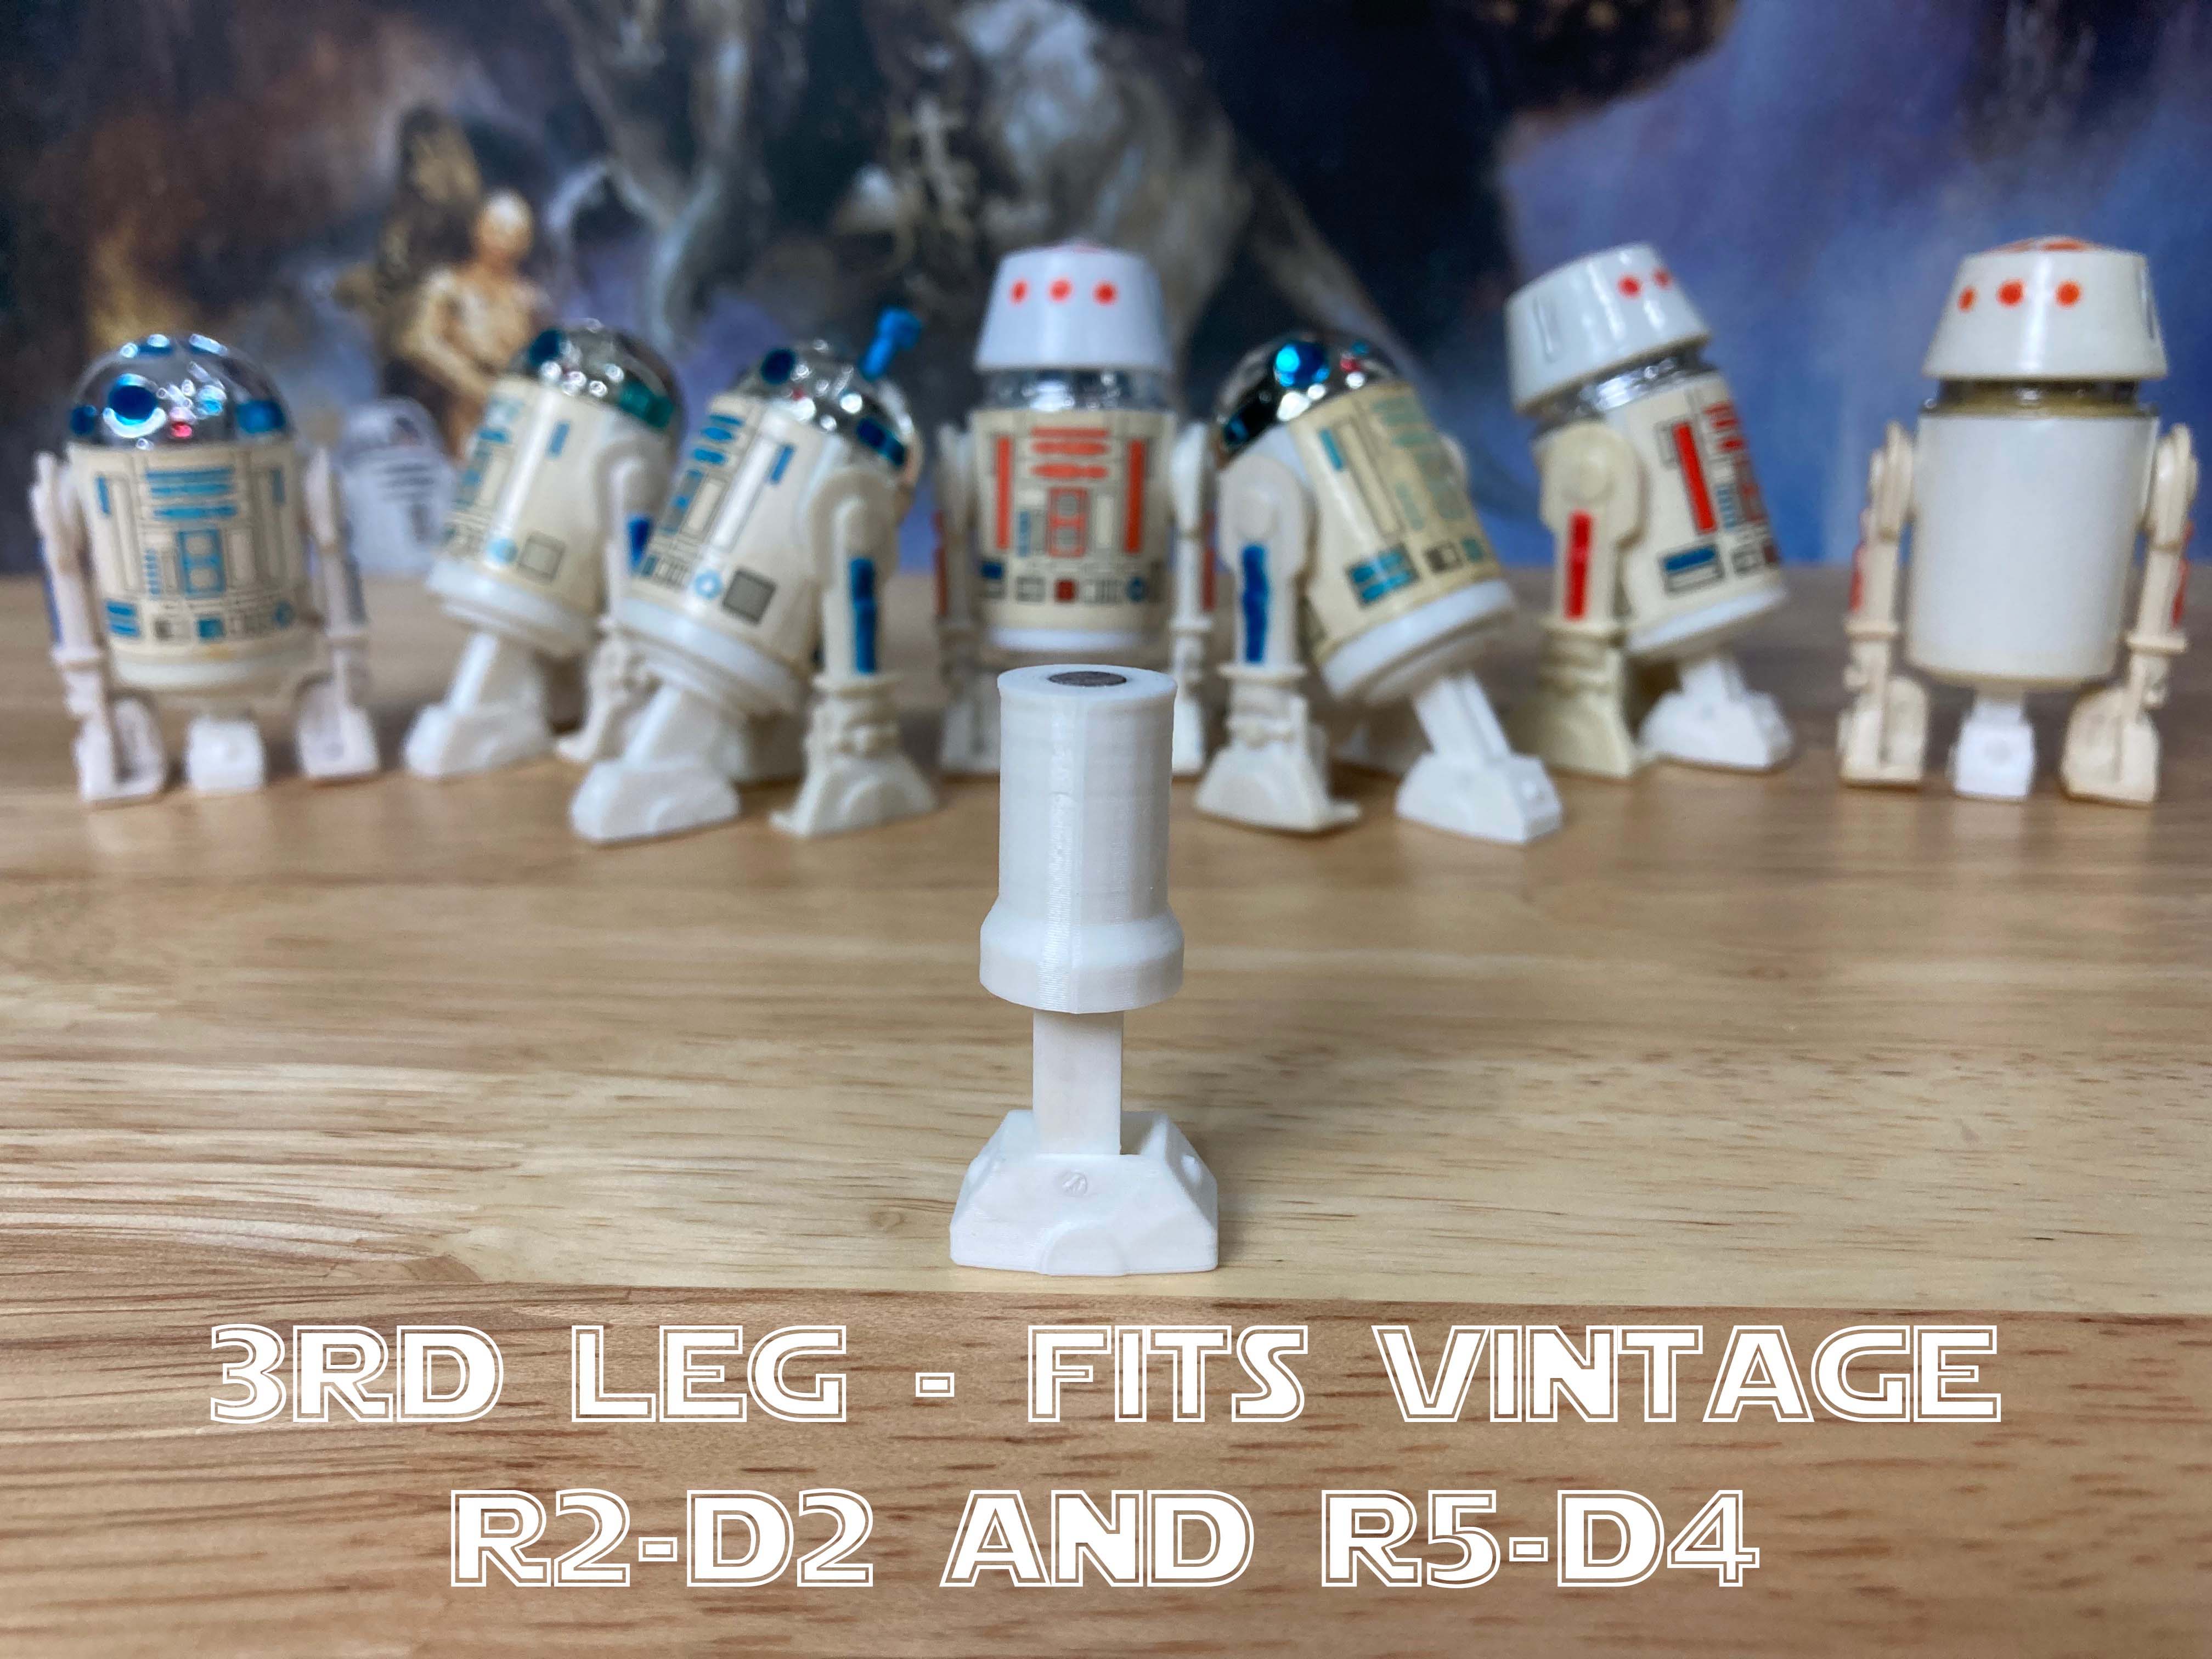 Add an articulated 3rd leg to your R5 for display!